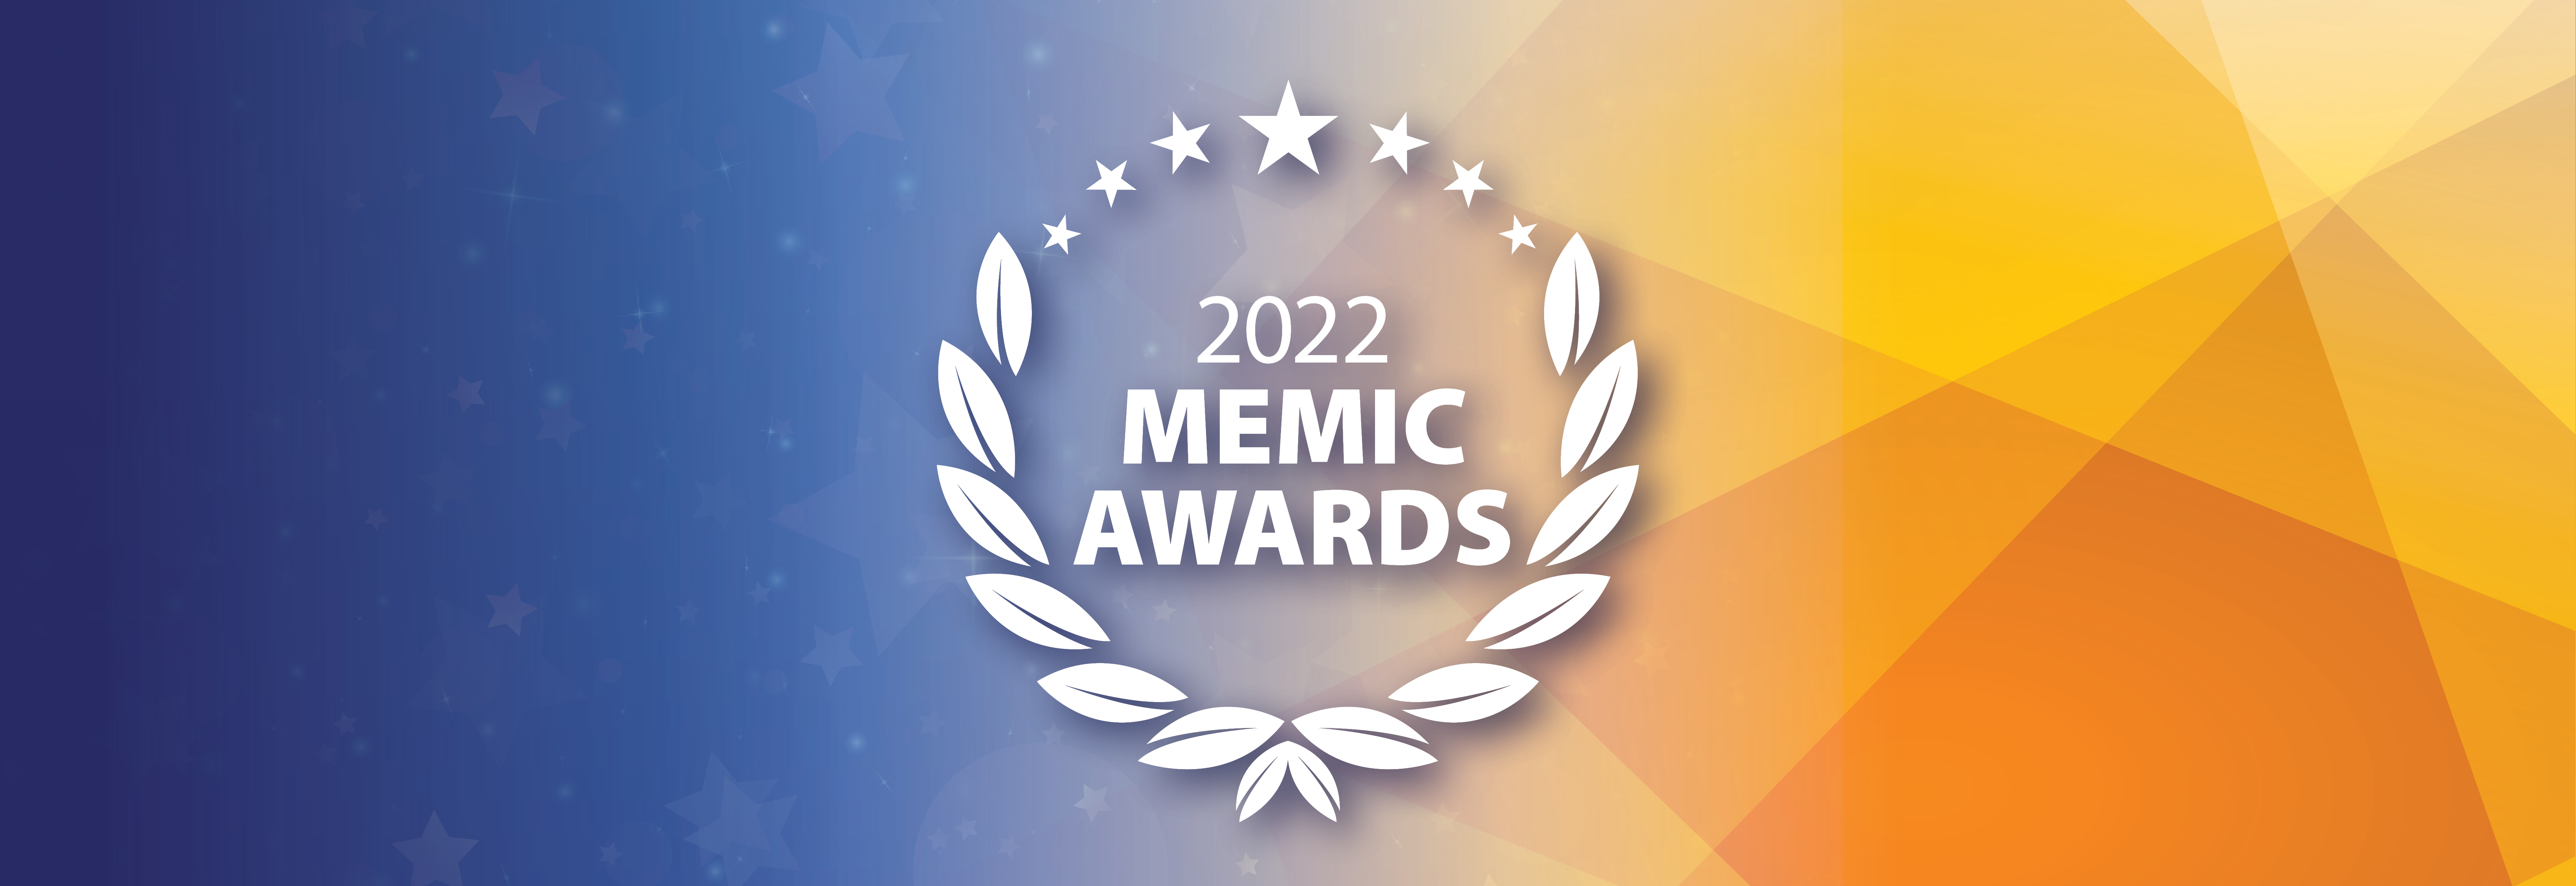 The MEMIC Awards 2022 - Page Header